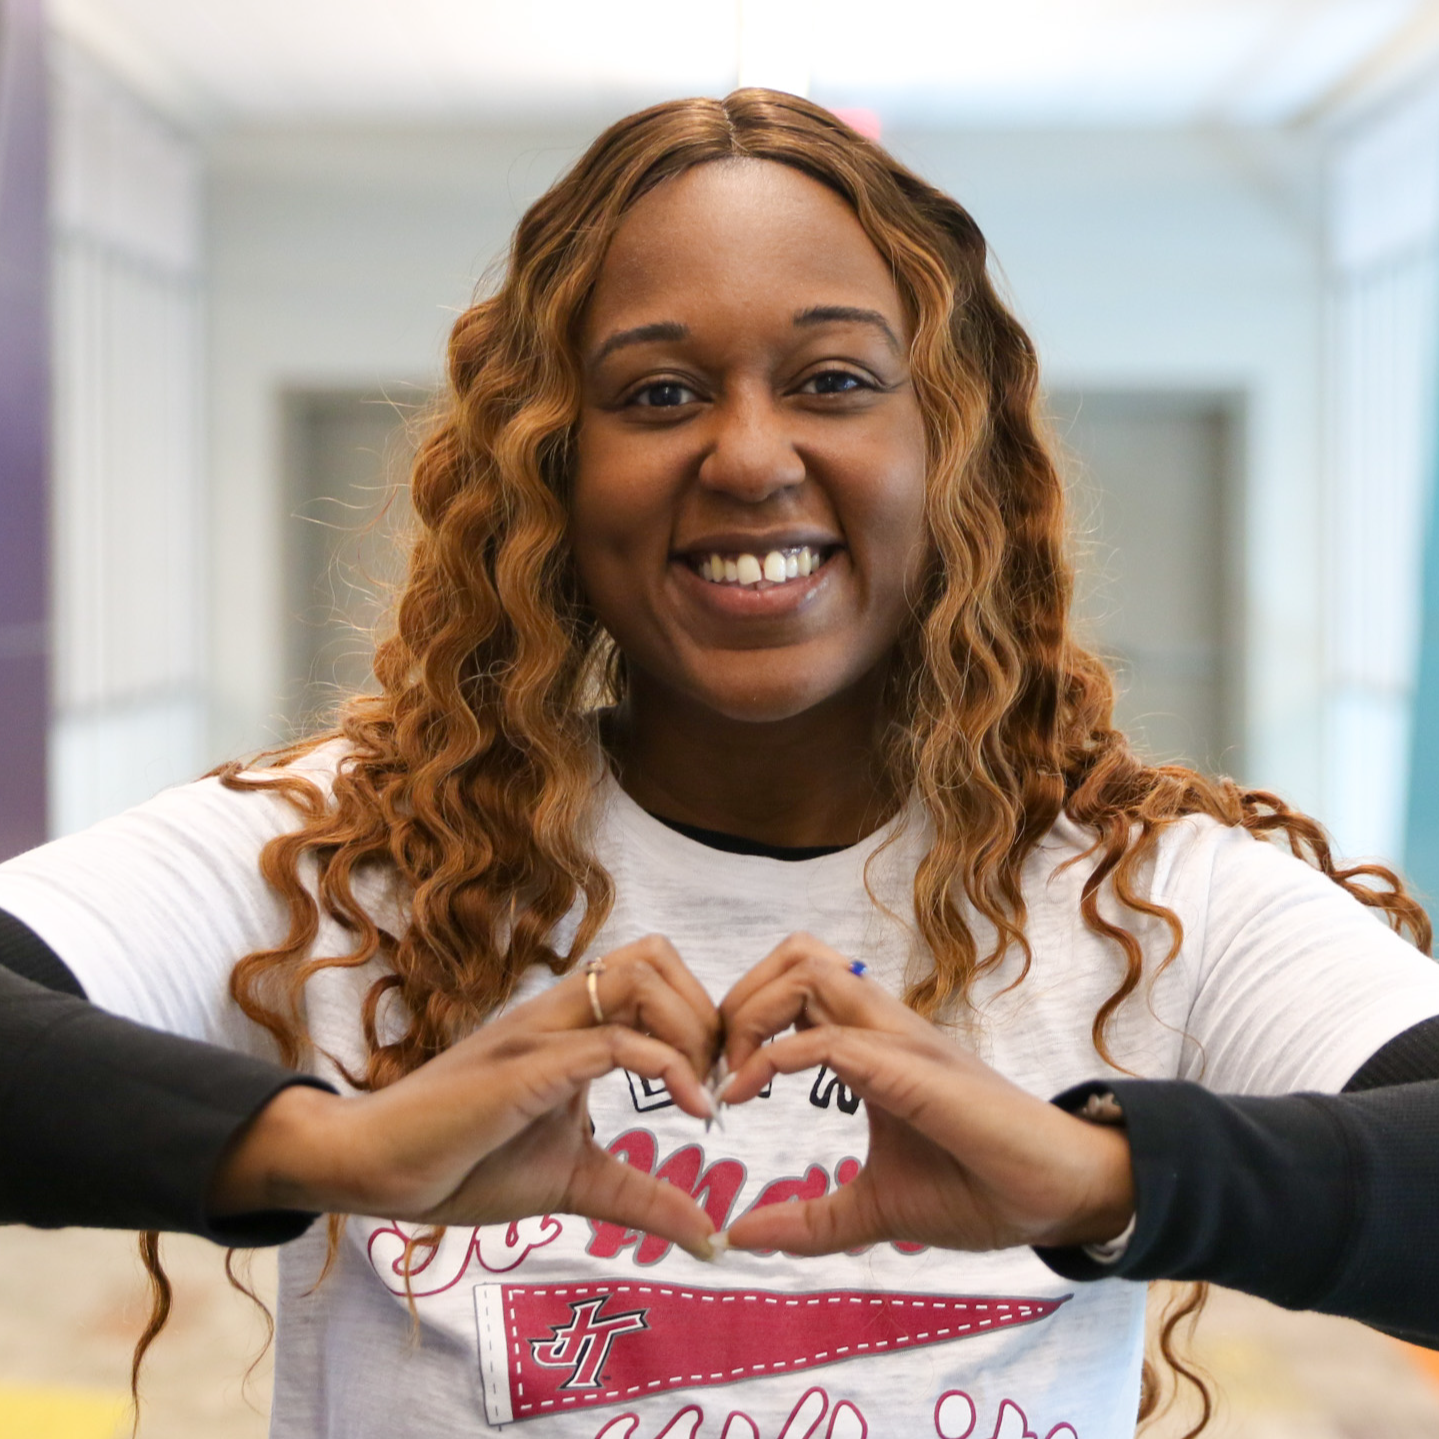 Photo of Dana Sykes making heart shape with hands